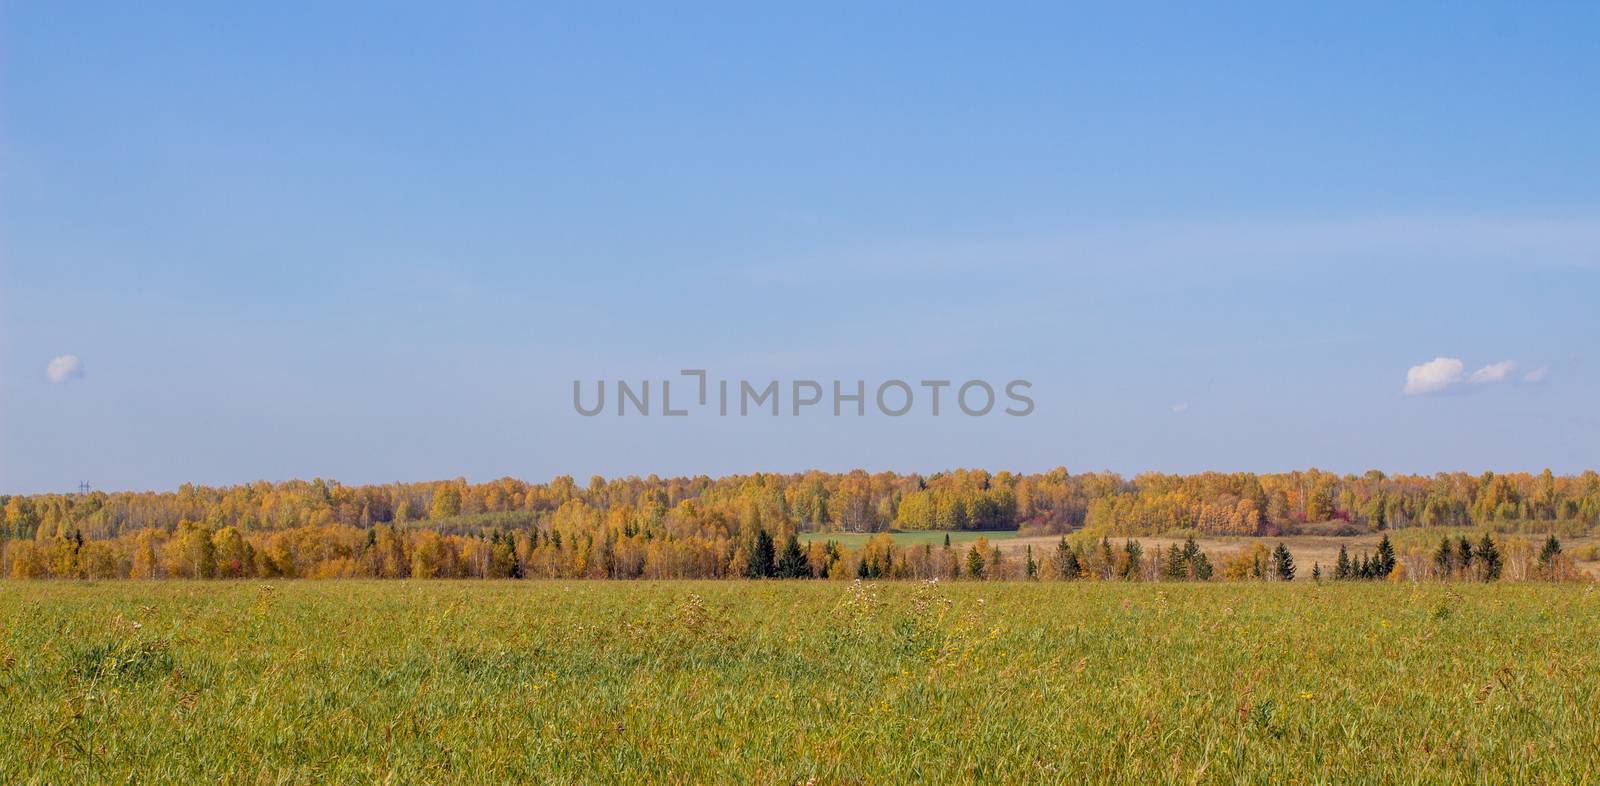 Autumn yellow forest and field. Blue sky with clouds over the forest. The beauty of nature in autumn.